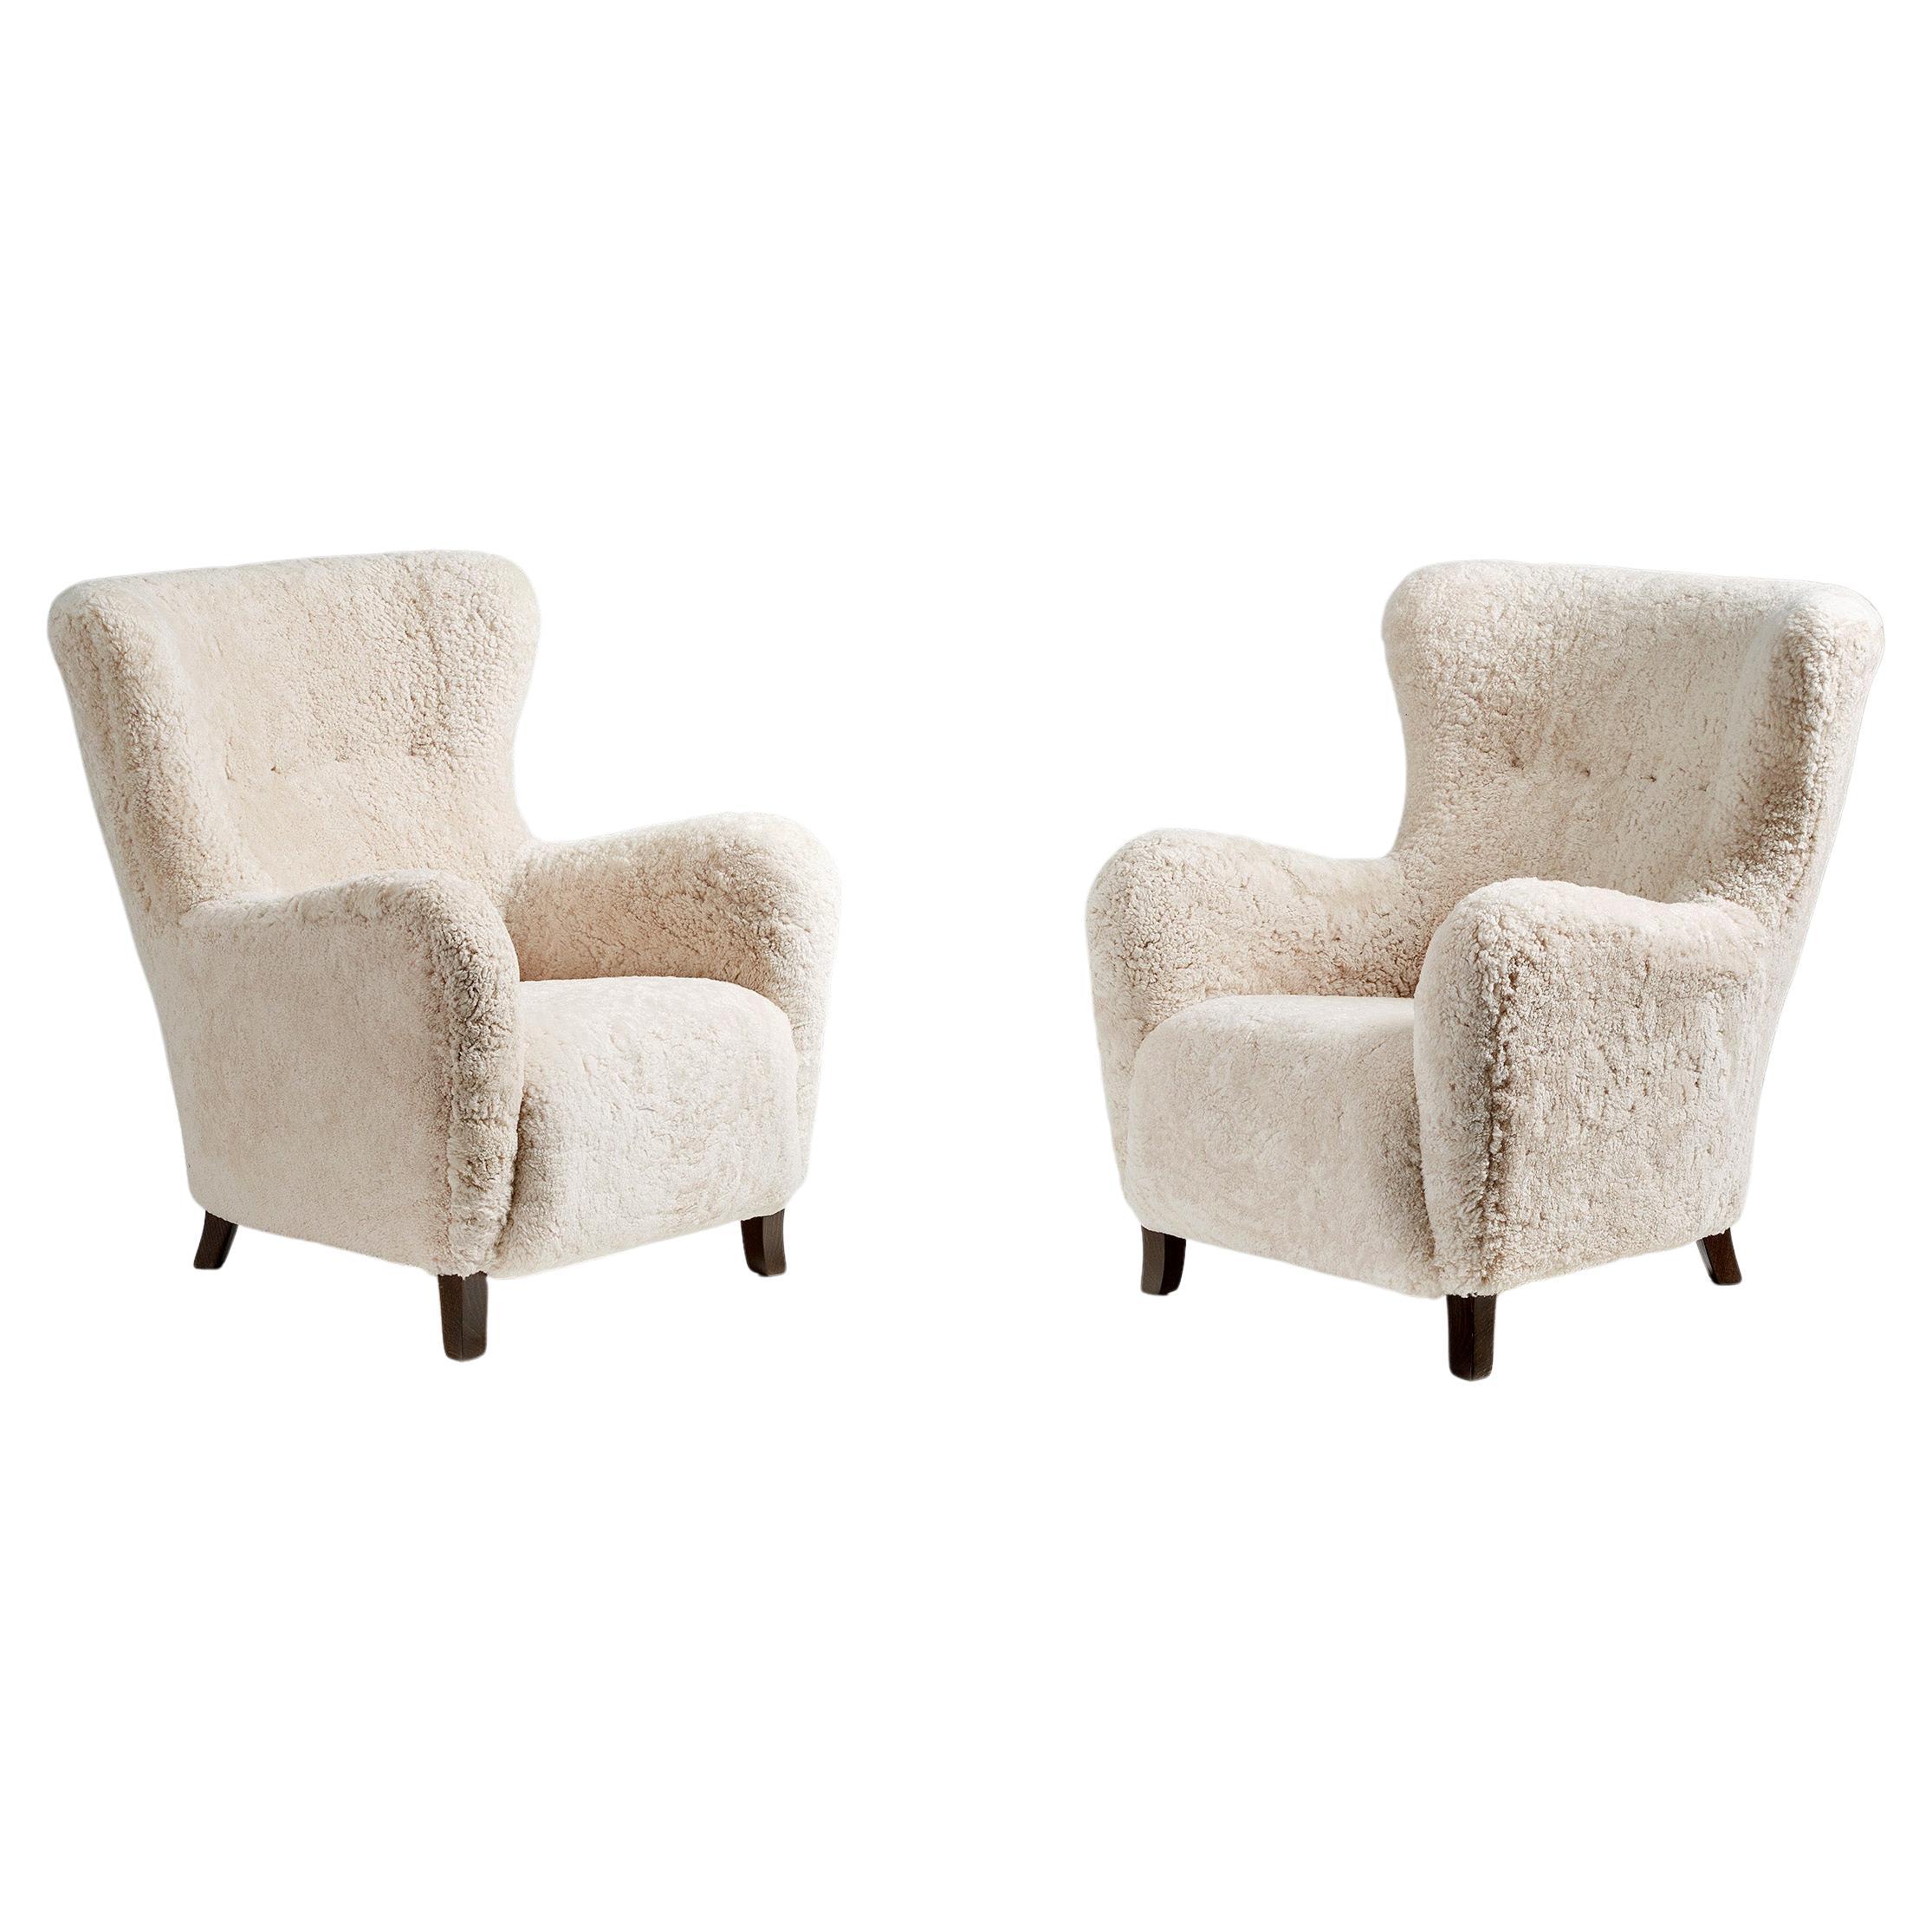 Pair of Custom Made Sheepskin Wing Chairs For Sale